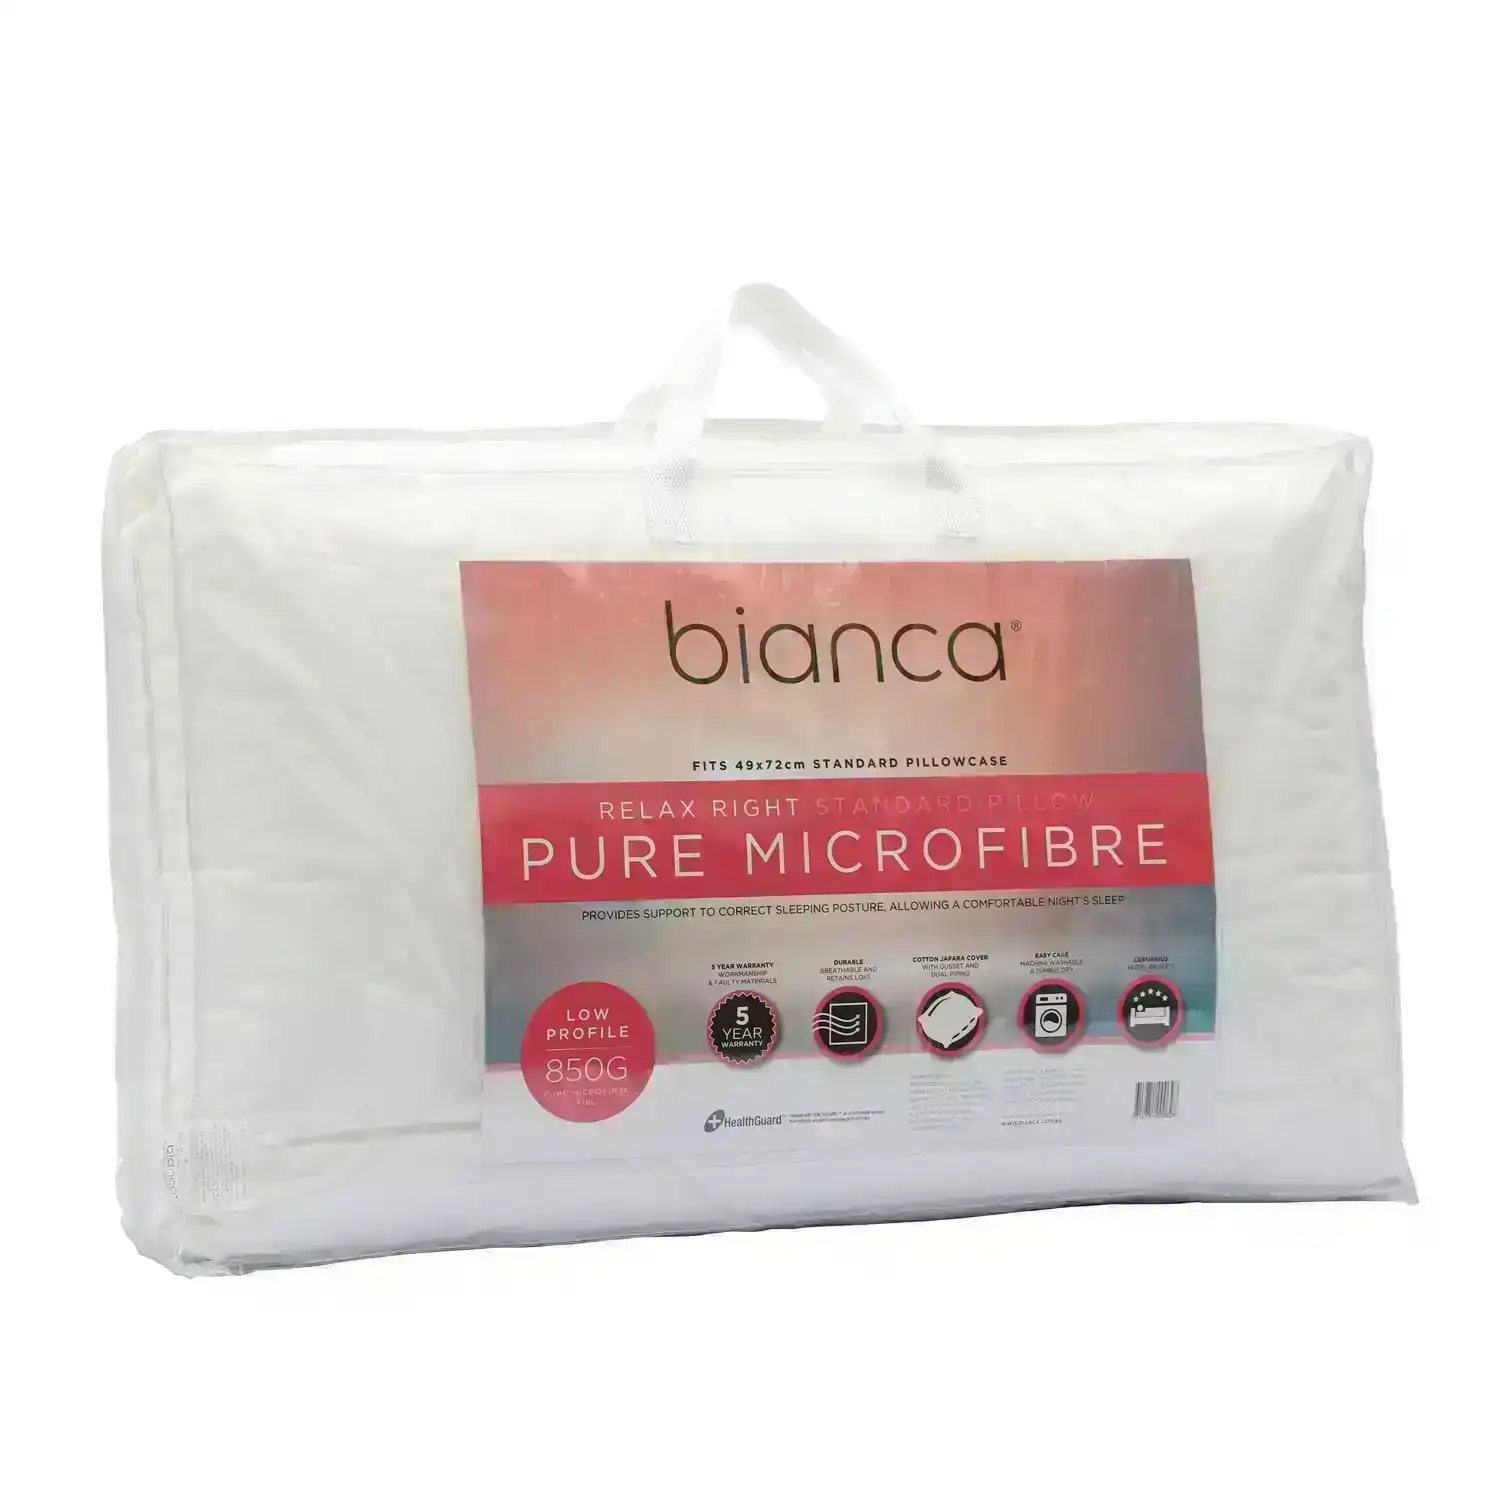 Bianca Bedding RELAX RIGHT PURE MICROFIBRE PILLOW LOW PROFILE 850G